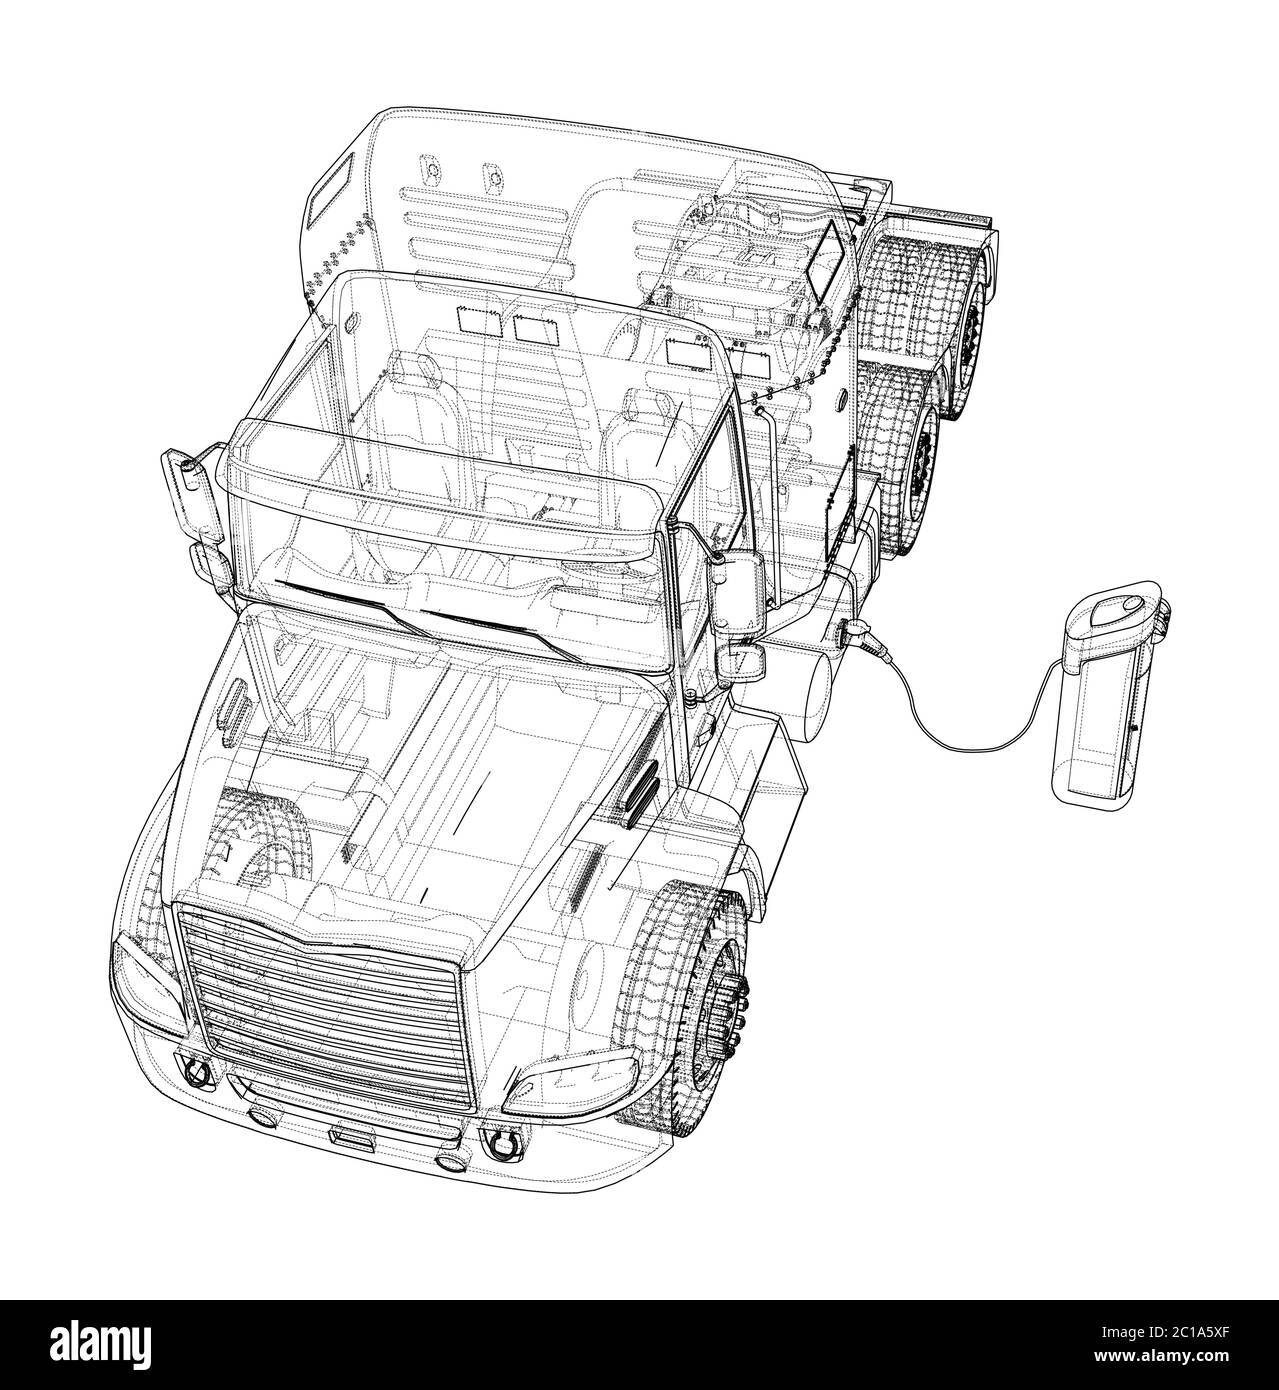 Electric Truck Charging Station Sketch. Vector Stock Vector